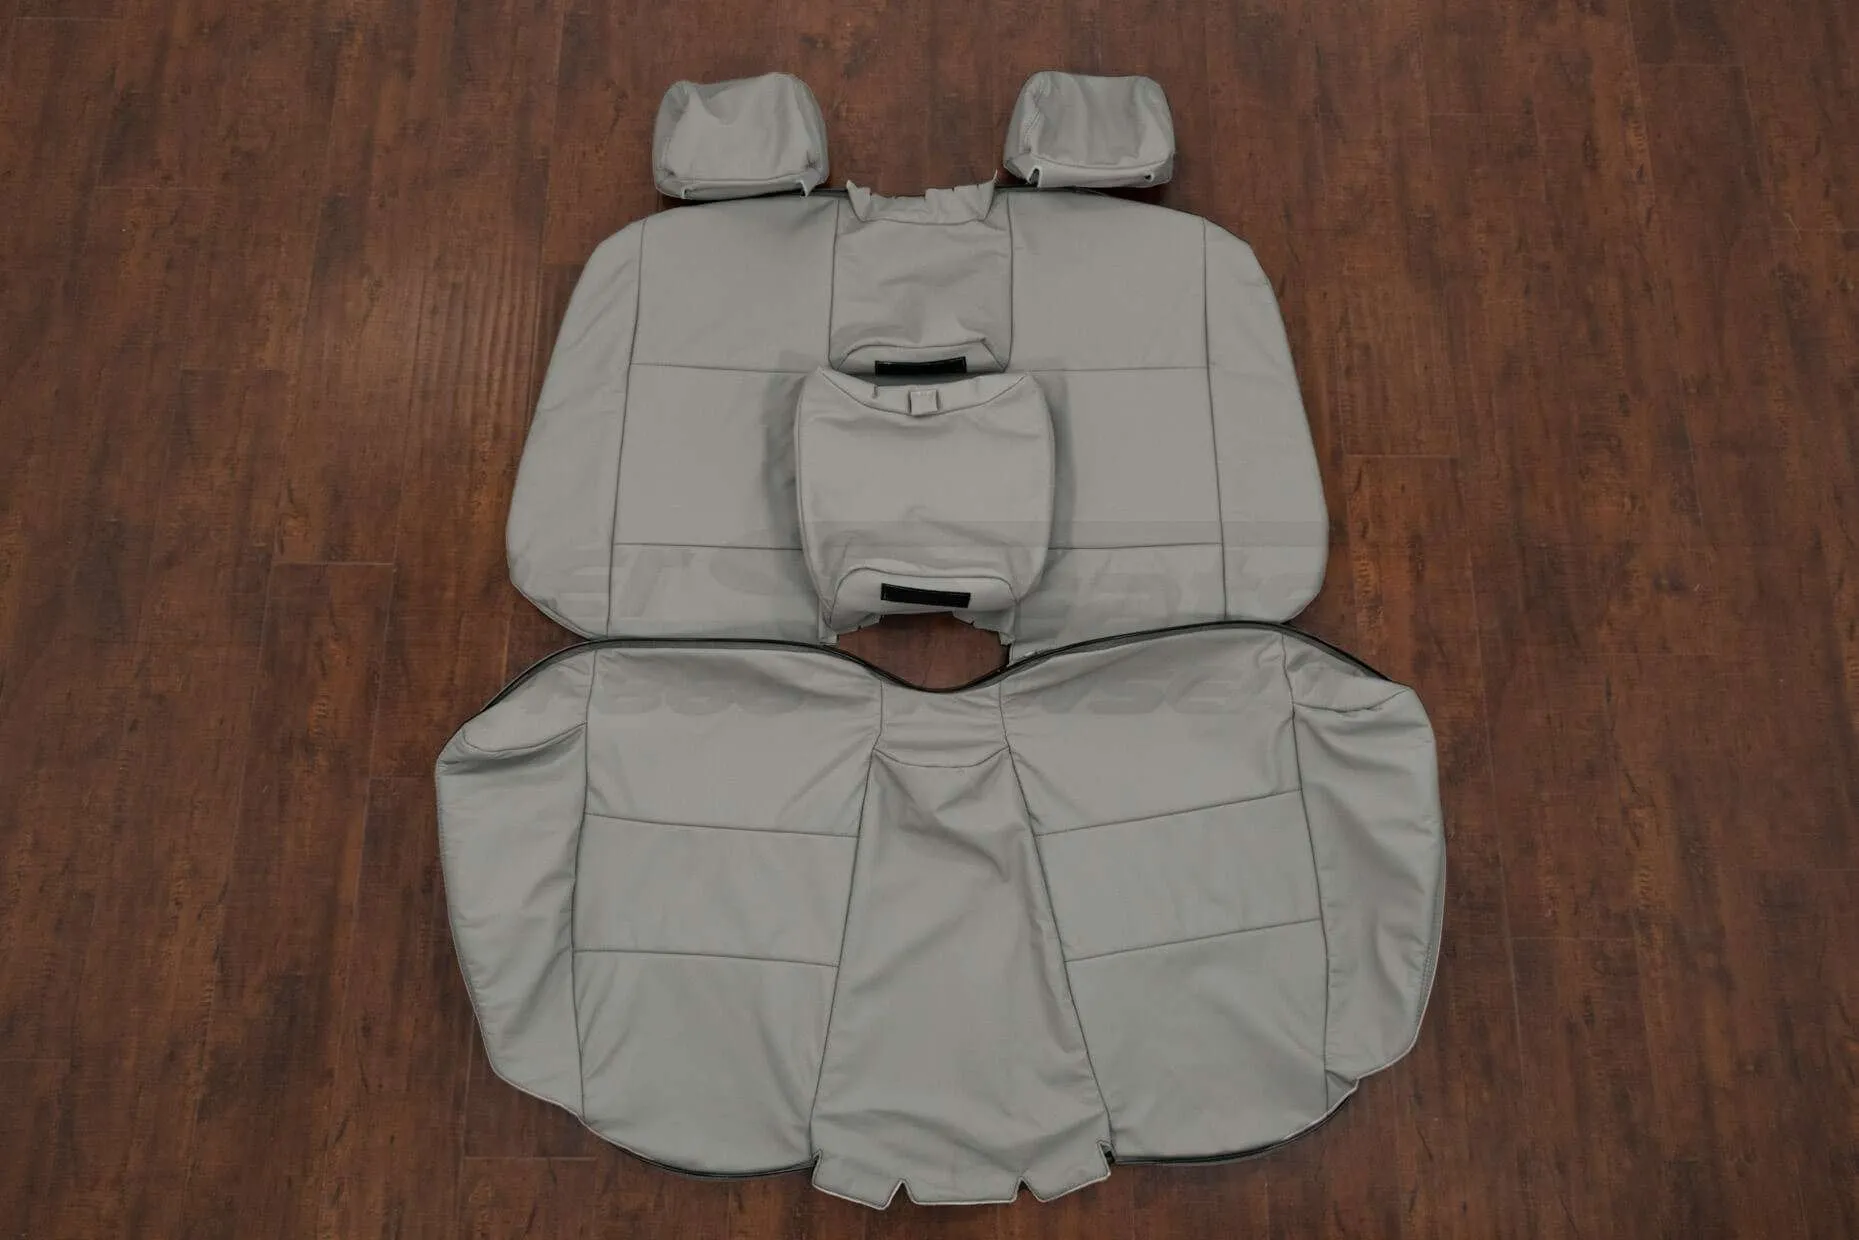 BMW 3 Series Leather Upholstery Kit in Frost - Rear seat upholstery w/ armrest